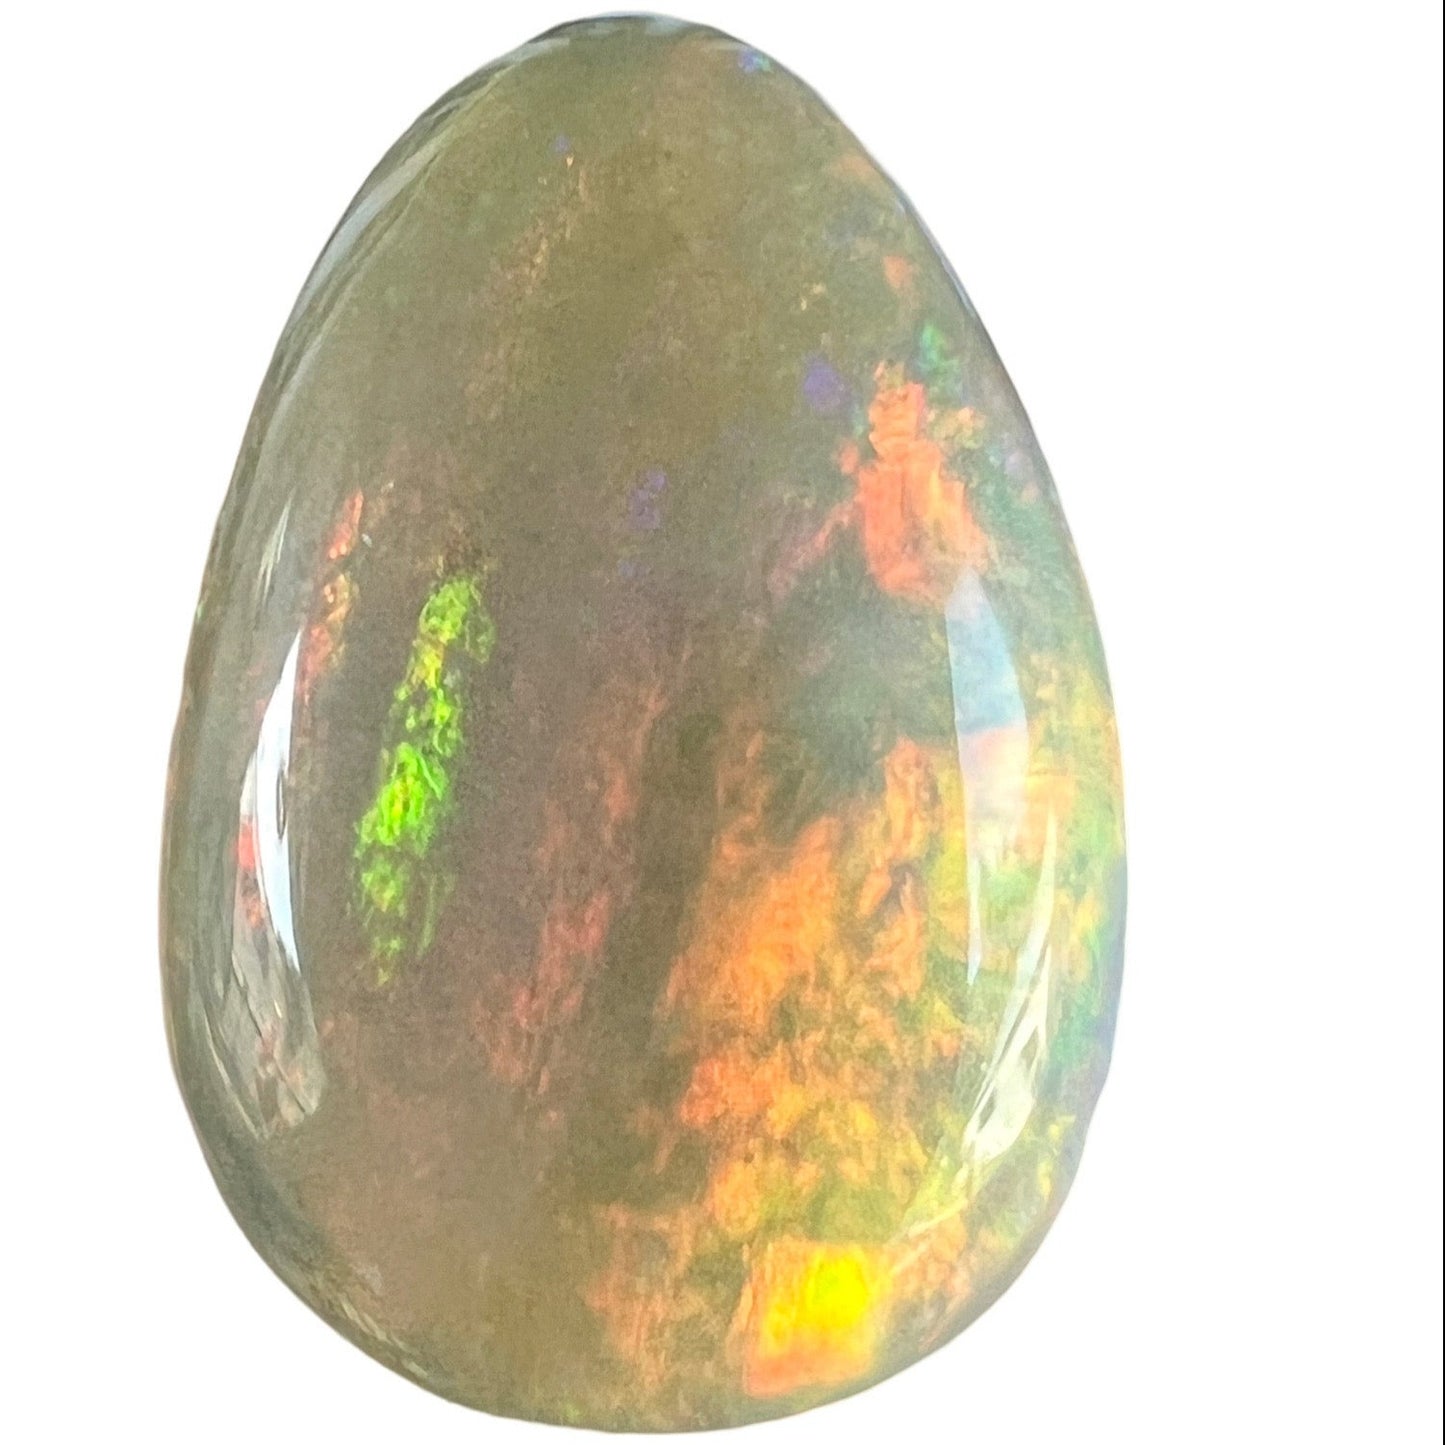 Nice little 2ct Lightning Ridge opal. Perfect shape and cut for mounting. Very nice colours.